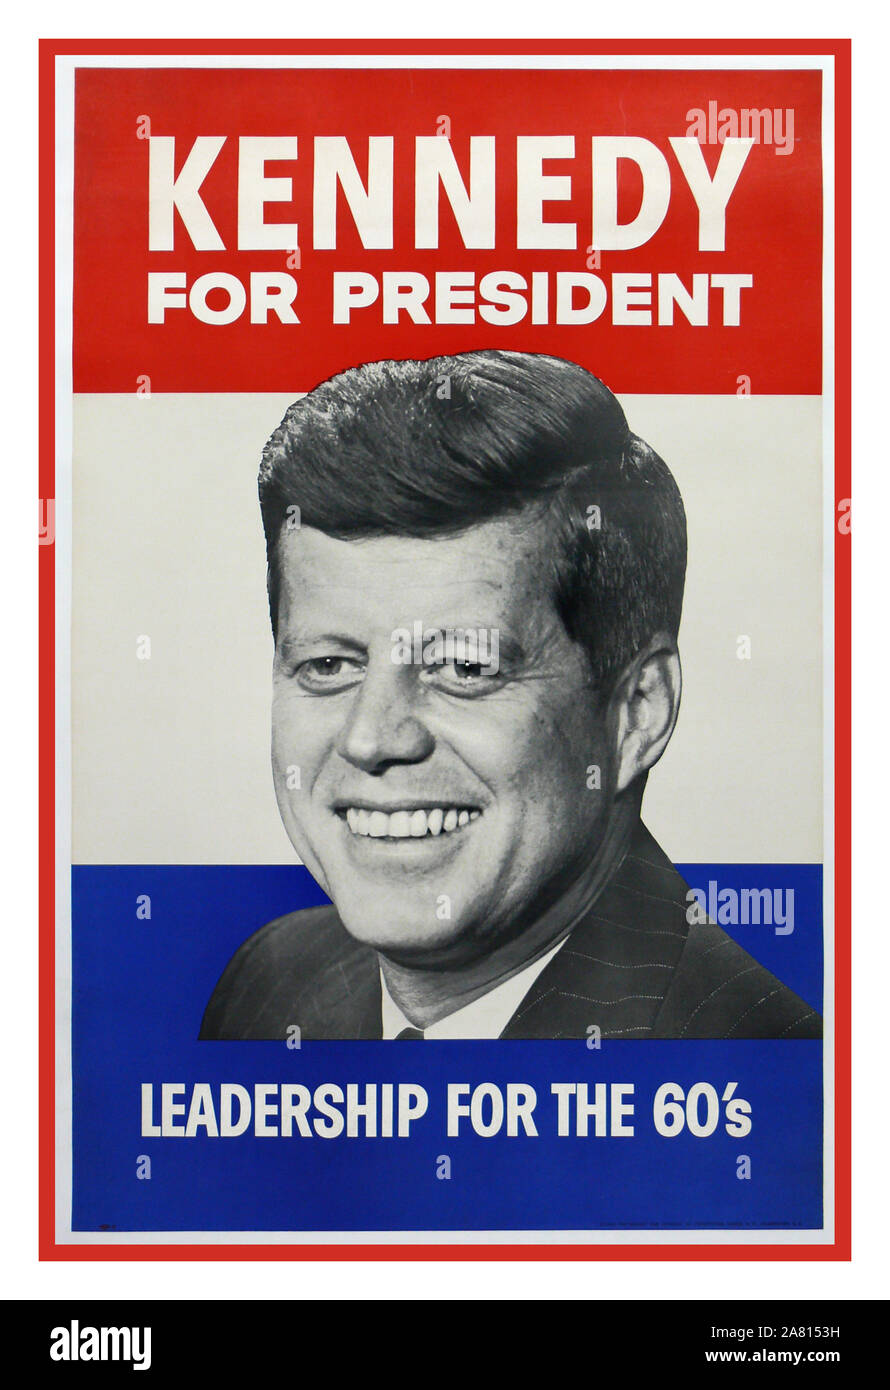 KENNEDY JFK Vintage election poster USA 1960 John F. Kennedy 1960 Presidential Campaign Poster....'Kennedy for President'  Leadership For The 60's  The inauguration of John F Kennedy took place on January 20, 1961, on the newly renovated east front of the United States Capitol, John Fitzgerald Kennedy was inaugurated as the 35th president of the United States. Stock Photo